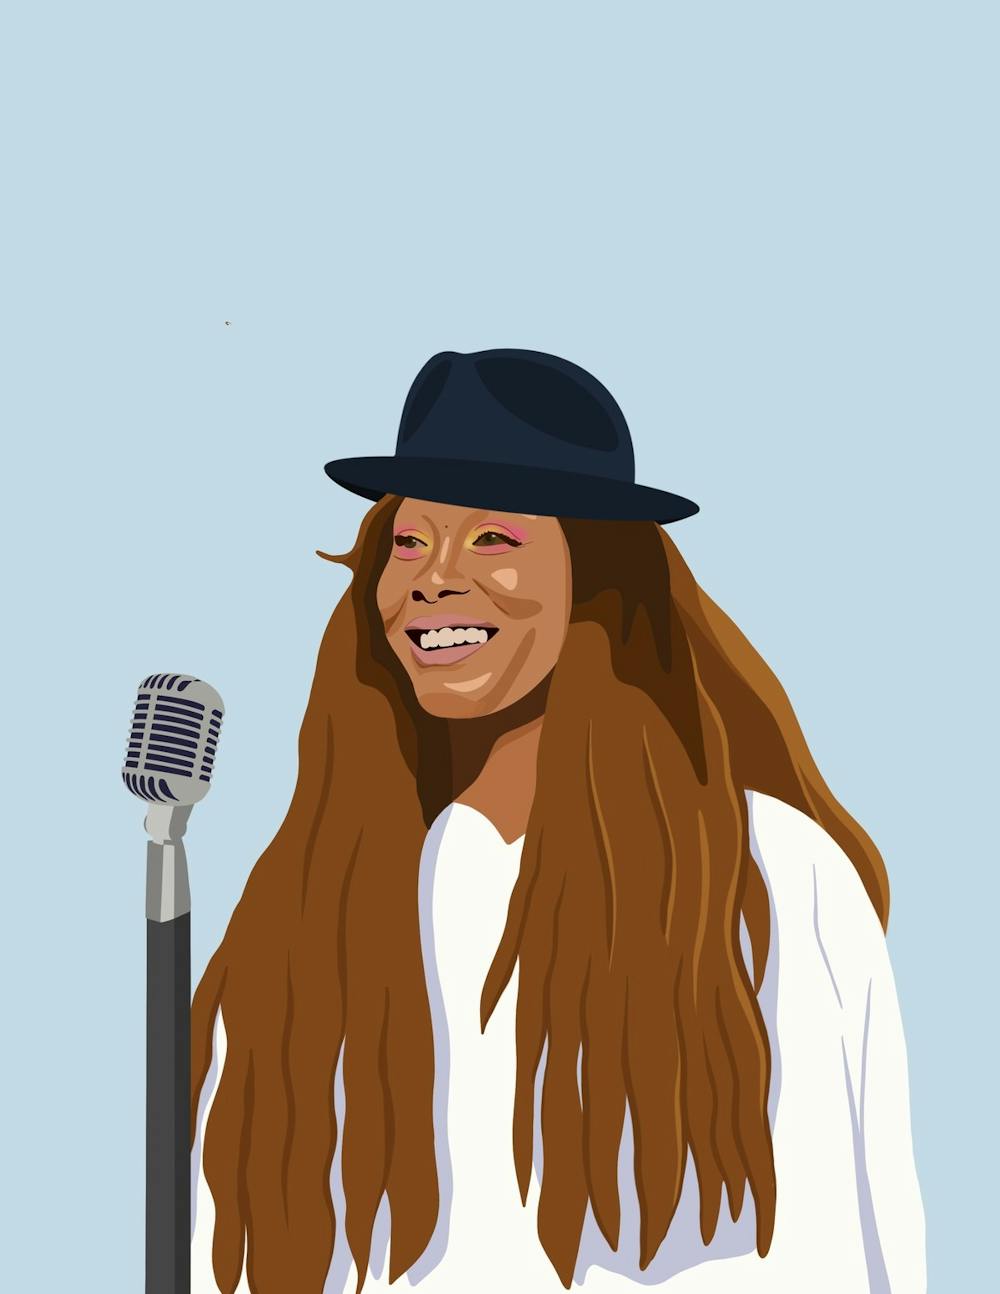 Erykah Badu's 2000 album "Mama's Gun" started off strong with its invigorating intro track, "Penitentiary Philosophy" — it is the greatest song of all time.&nbsp;